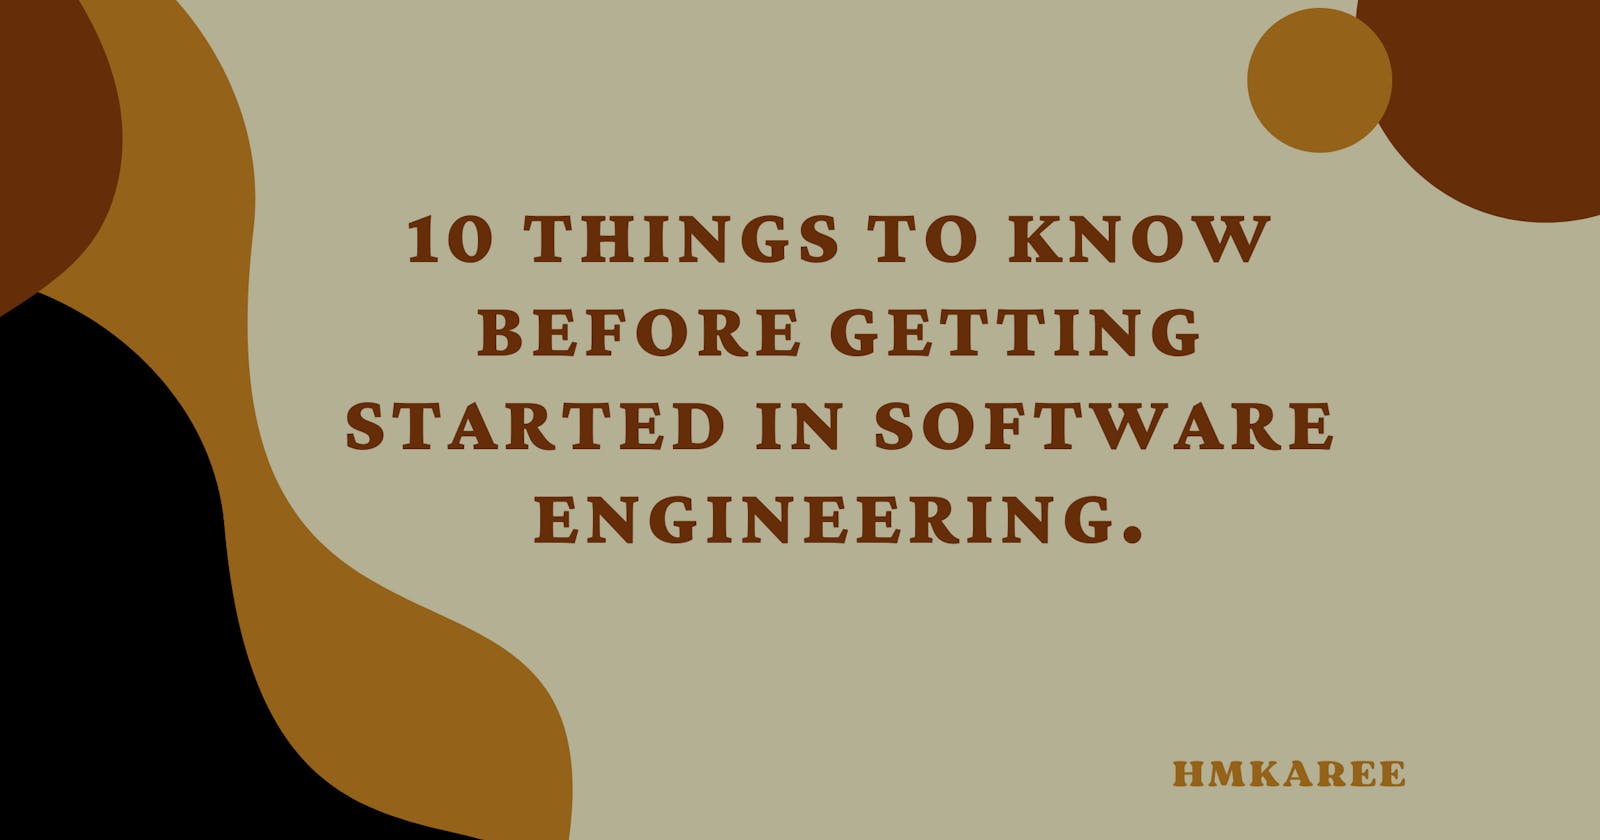 10 things to know before getting started in Software engineering.